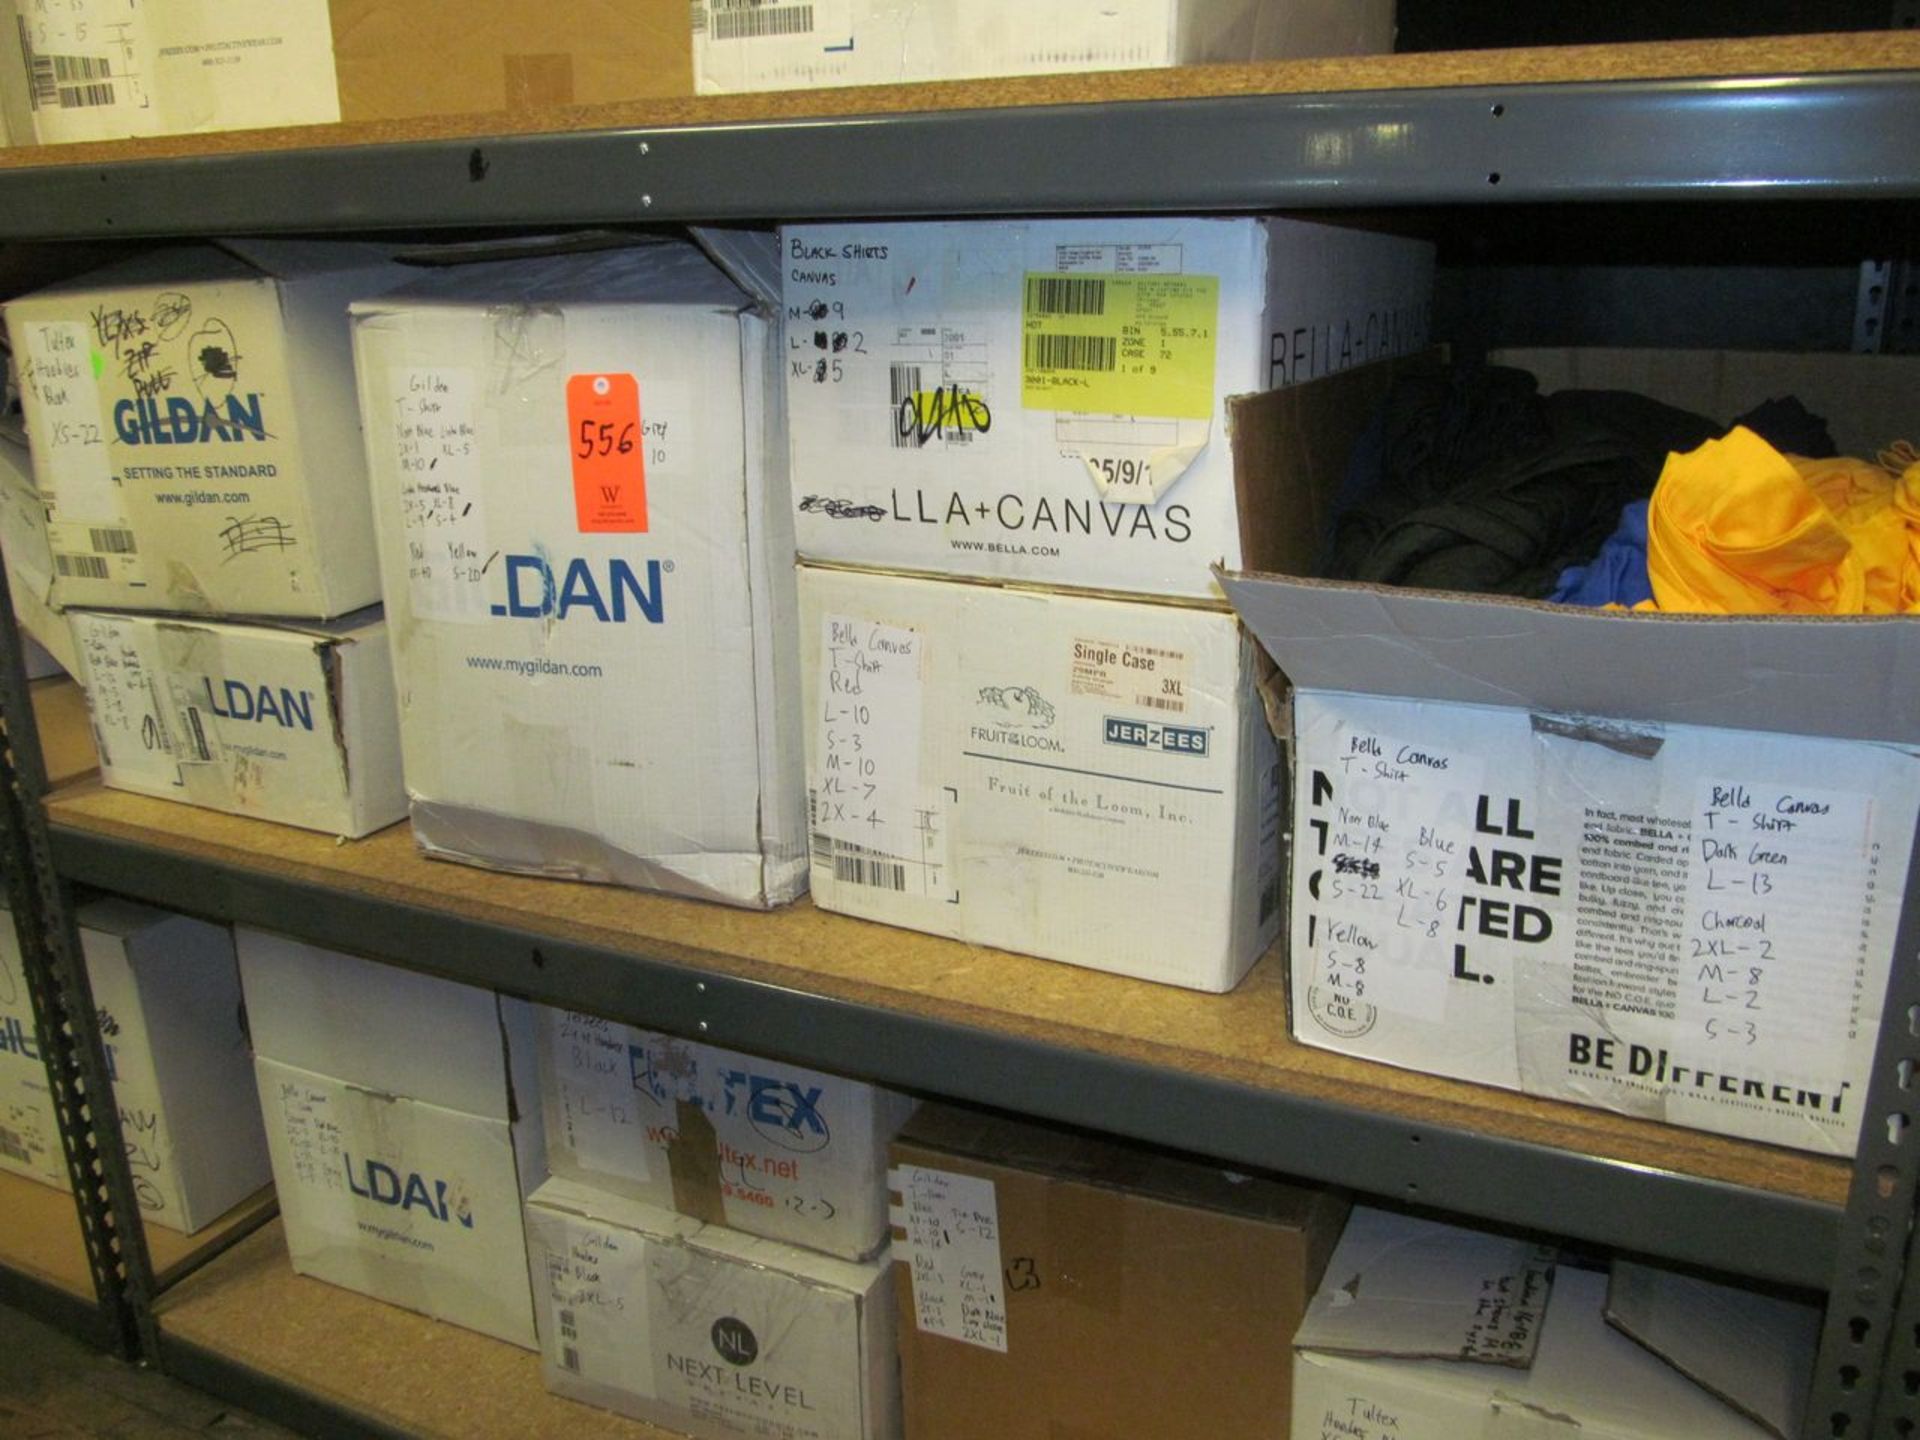 Lot - Contents of Shelf, to Include: (6+) Boxes of Un-Printed Black Hoodies, (3+) Boxes of Un- - Image 2 of 3